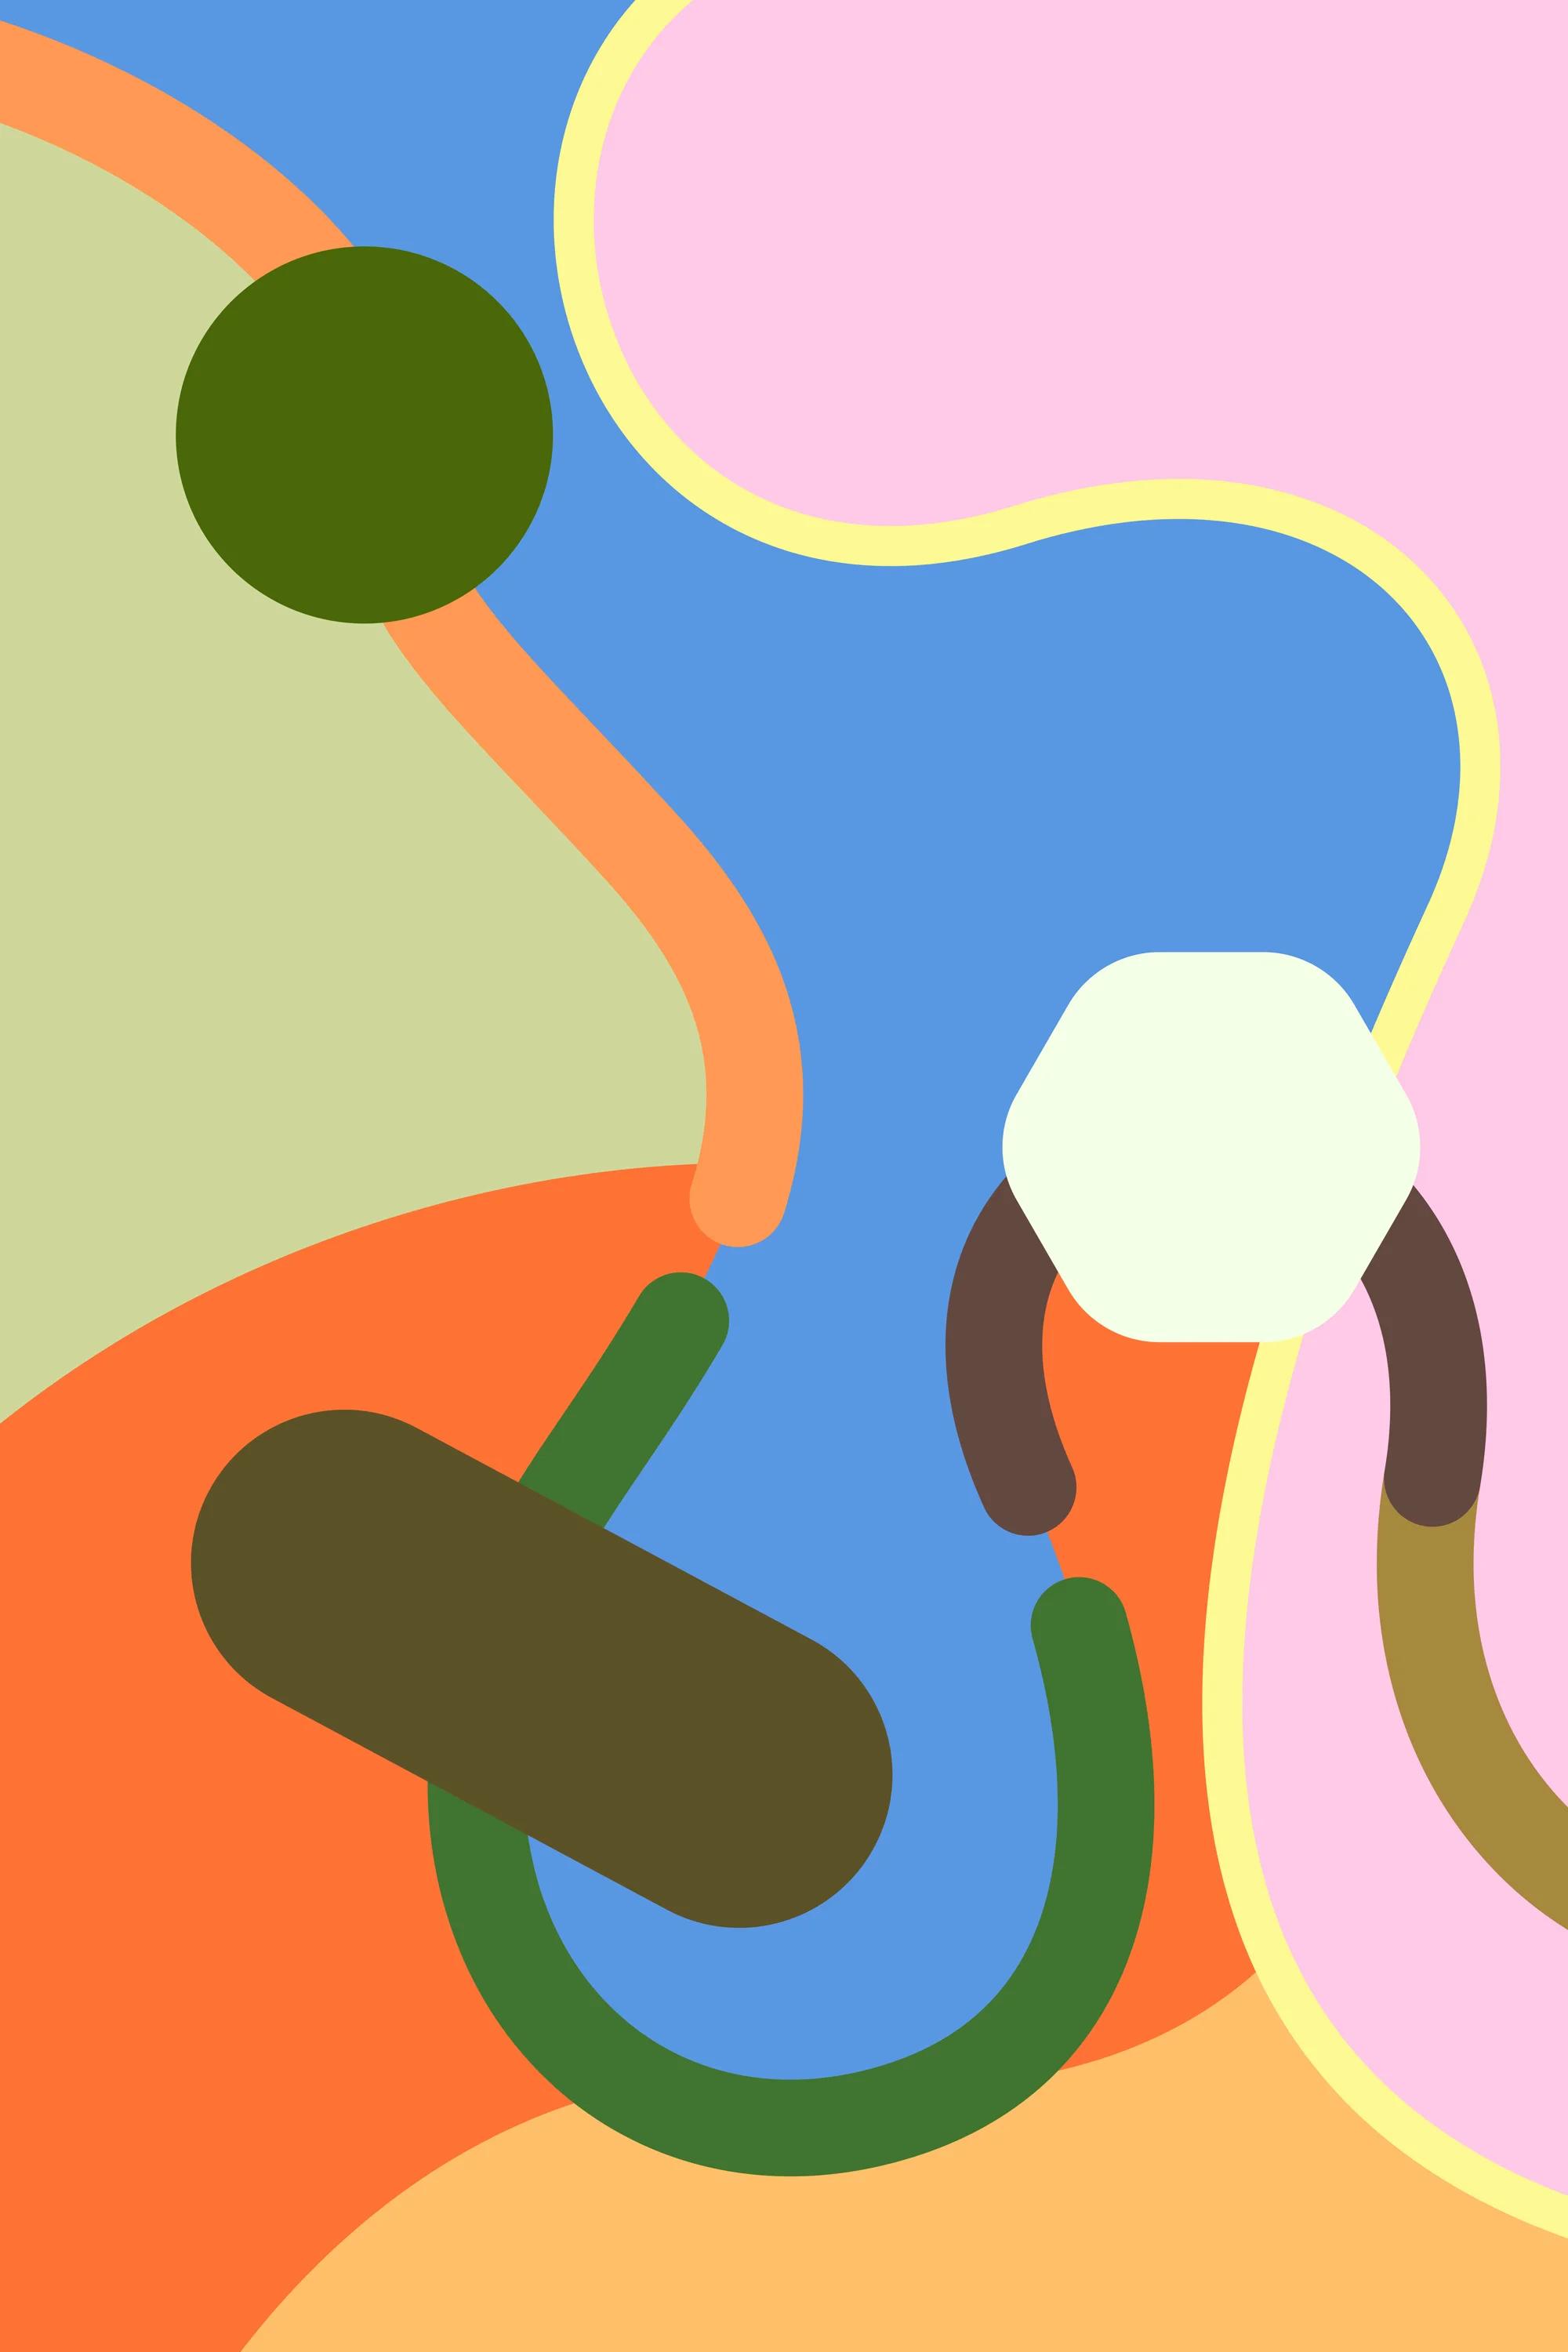 Illustration of colorful abstract shapes